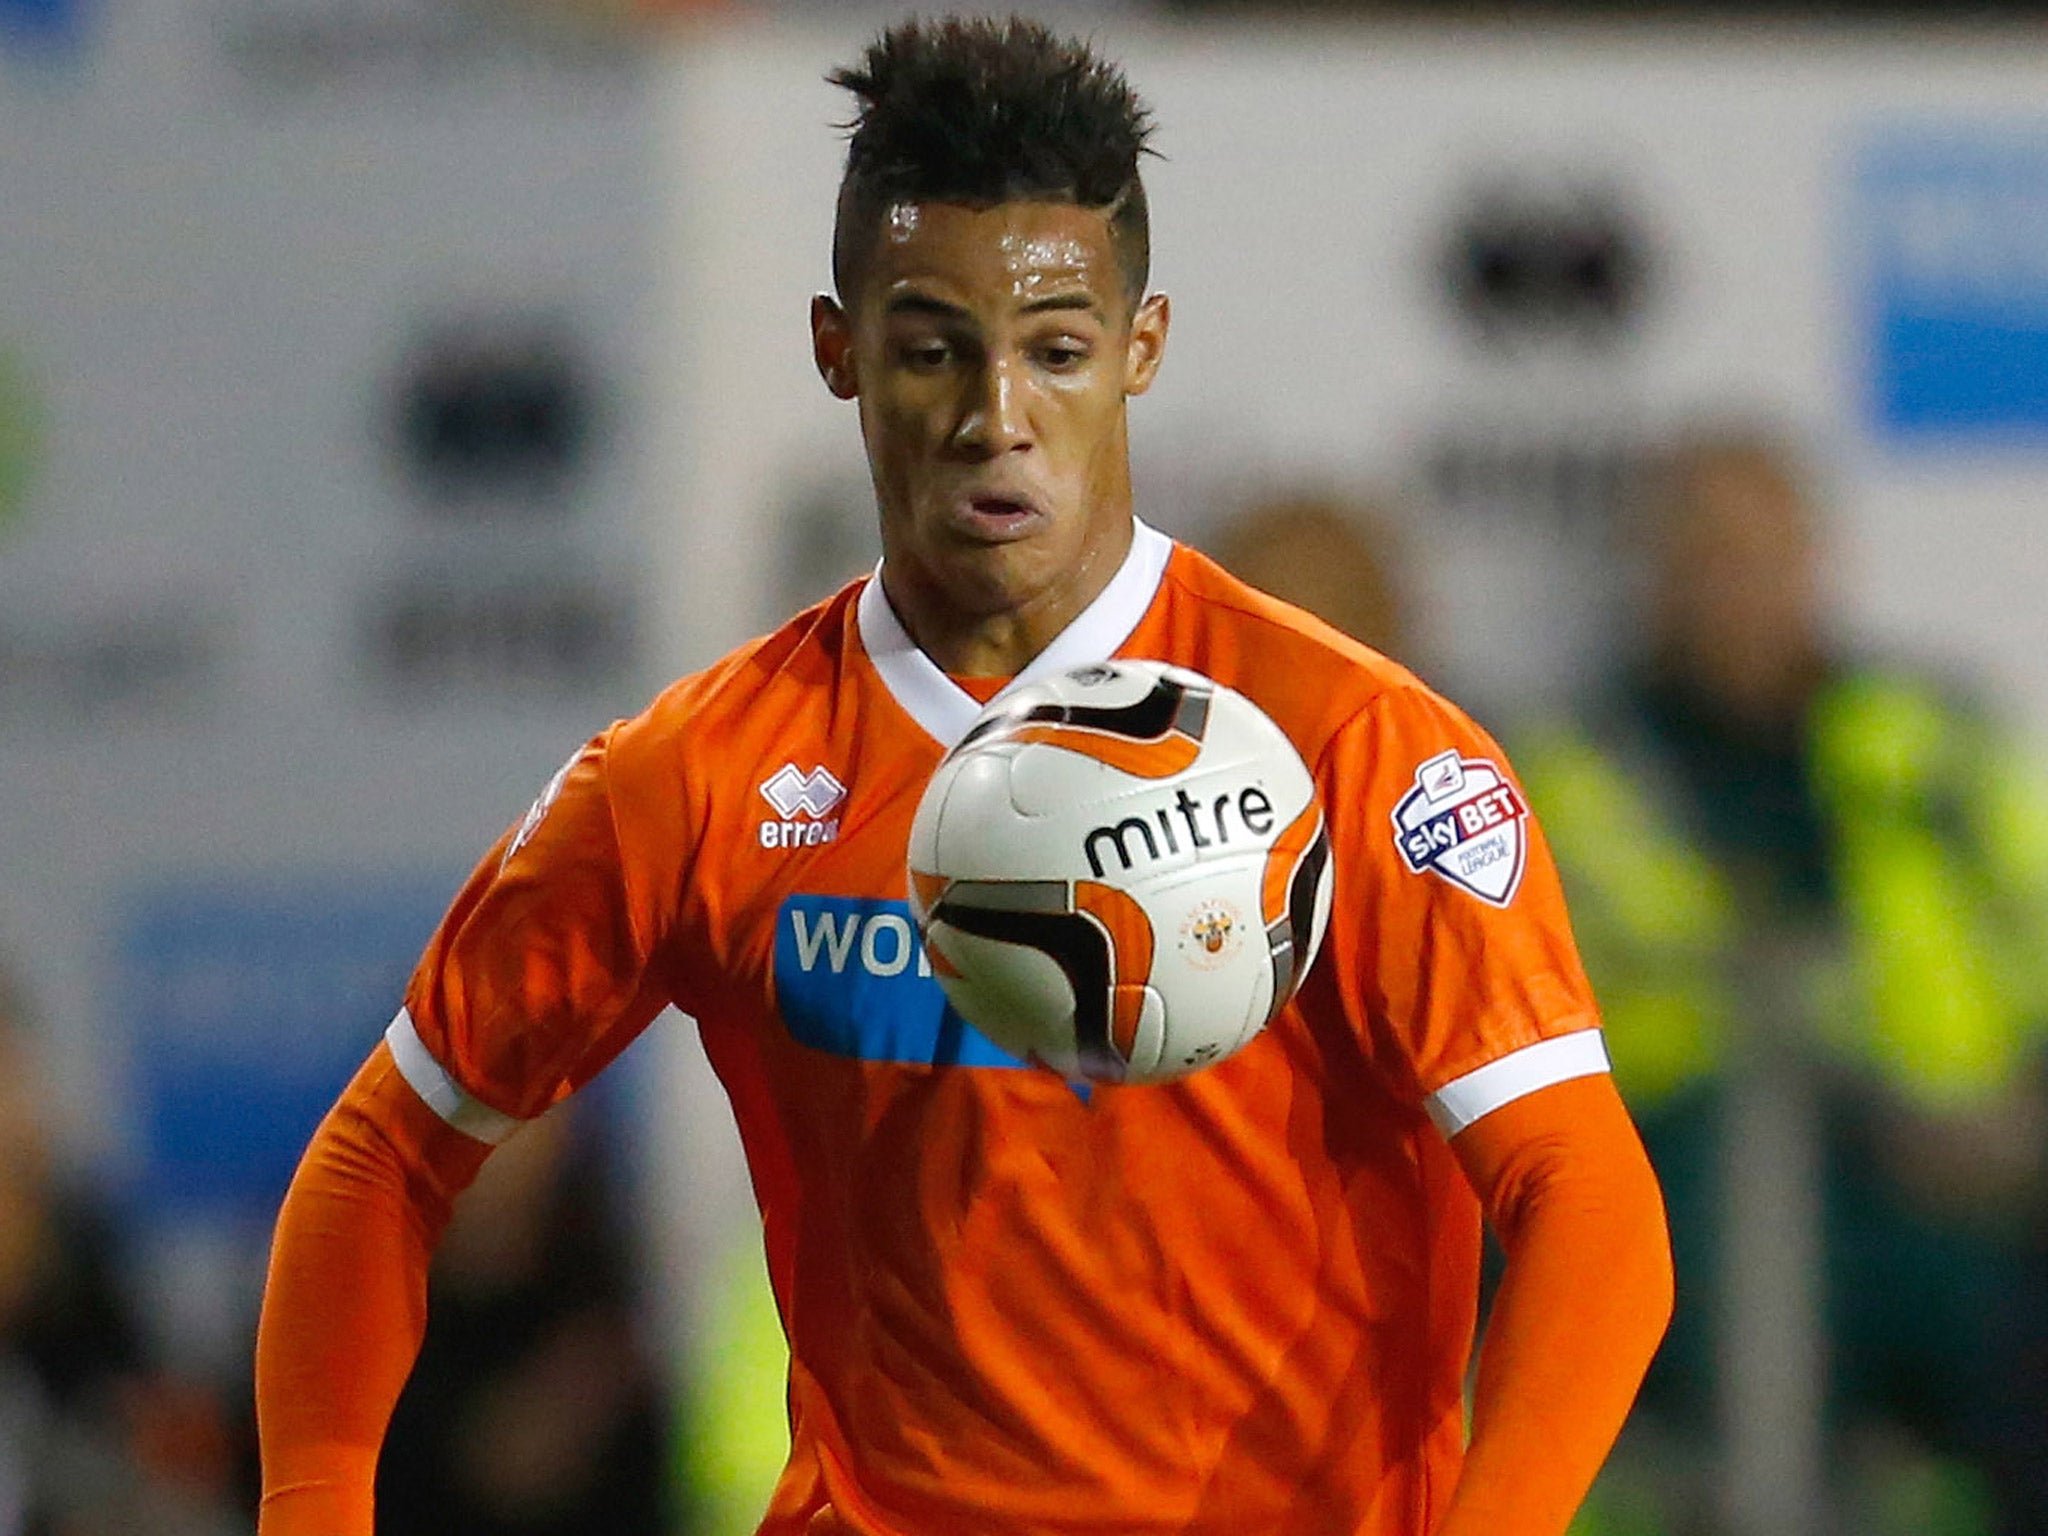 Tom Ince is expected to join a Premier League club